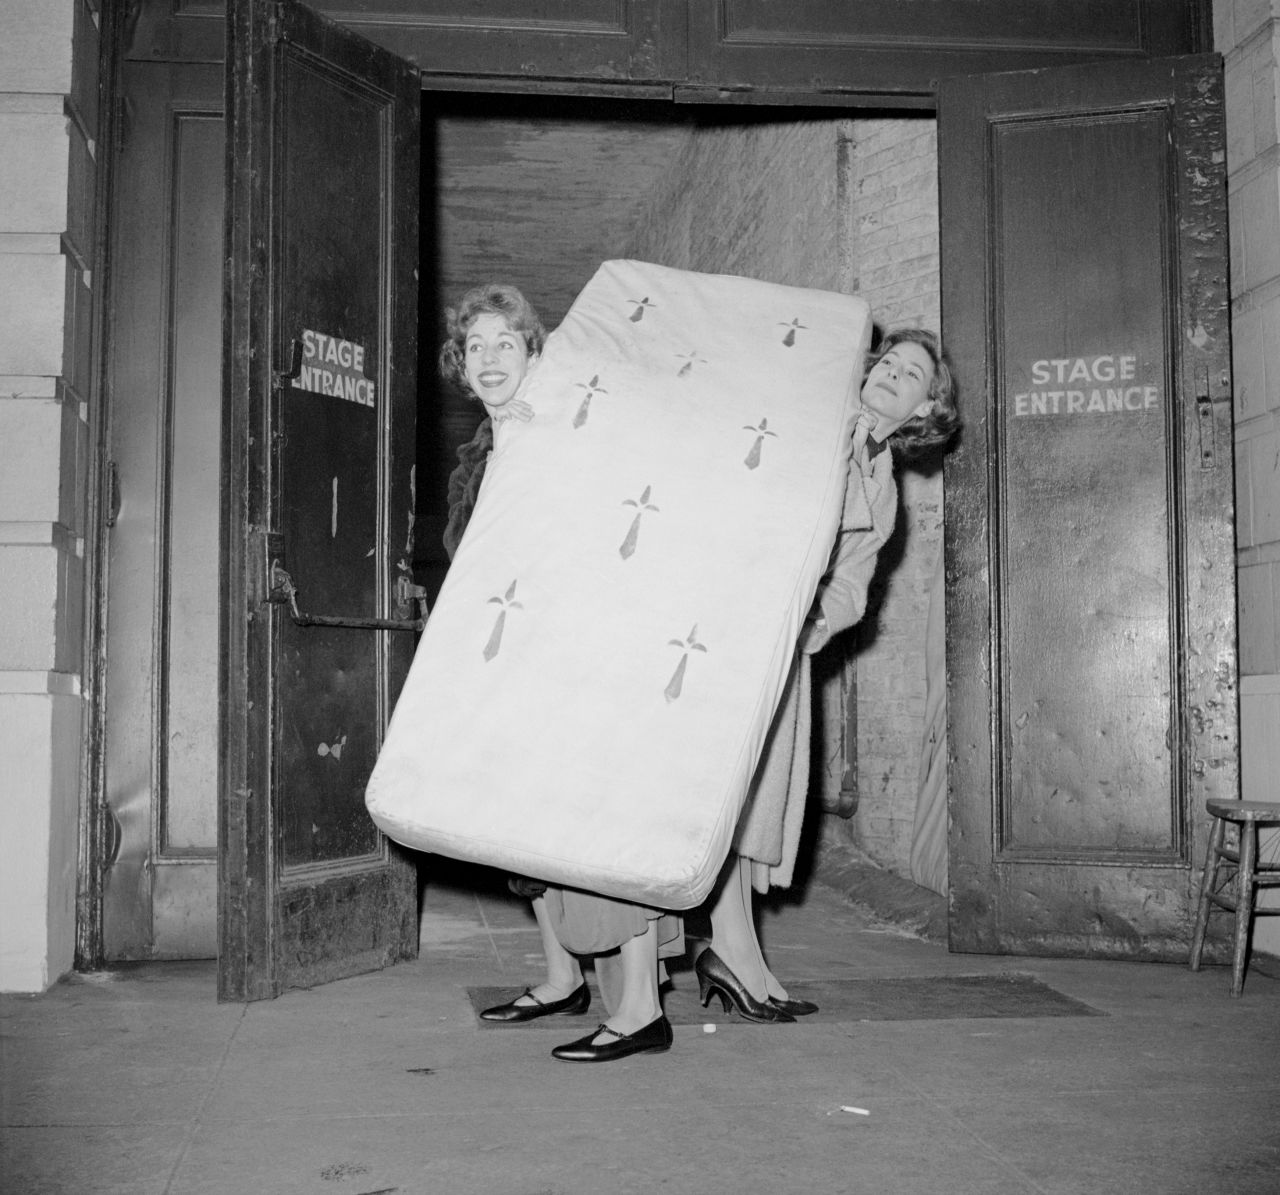 Burnett, left, and Mary Rodgers move a prop mattress through the stage door of the Alvin Theatre in New York in 1959. Burnett's first Broadway play was the musical "Once Upon a Mattress," and Rodgers wrote the score. Burnett earned a Tony Award nomination for her work on the play.